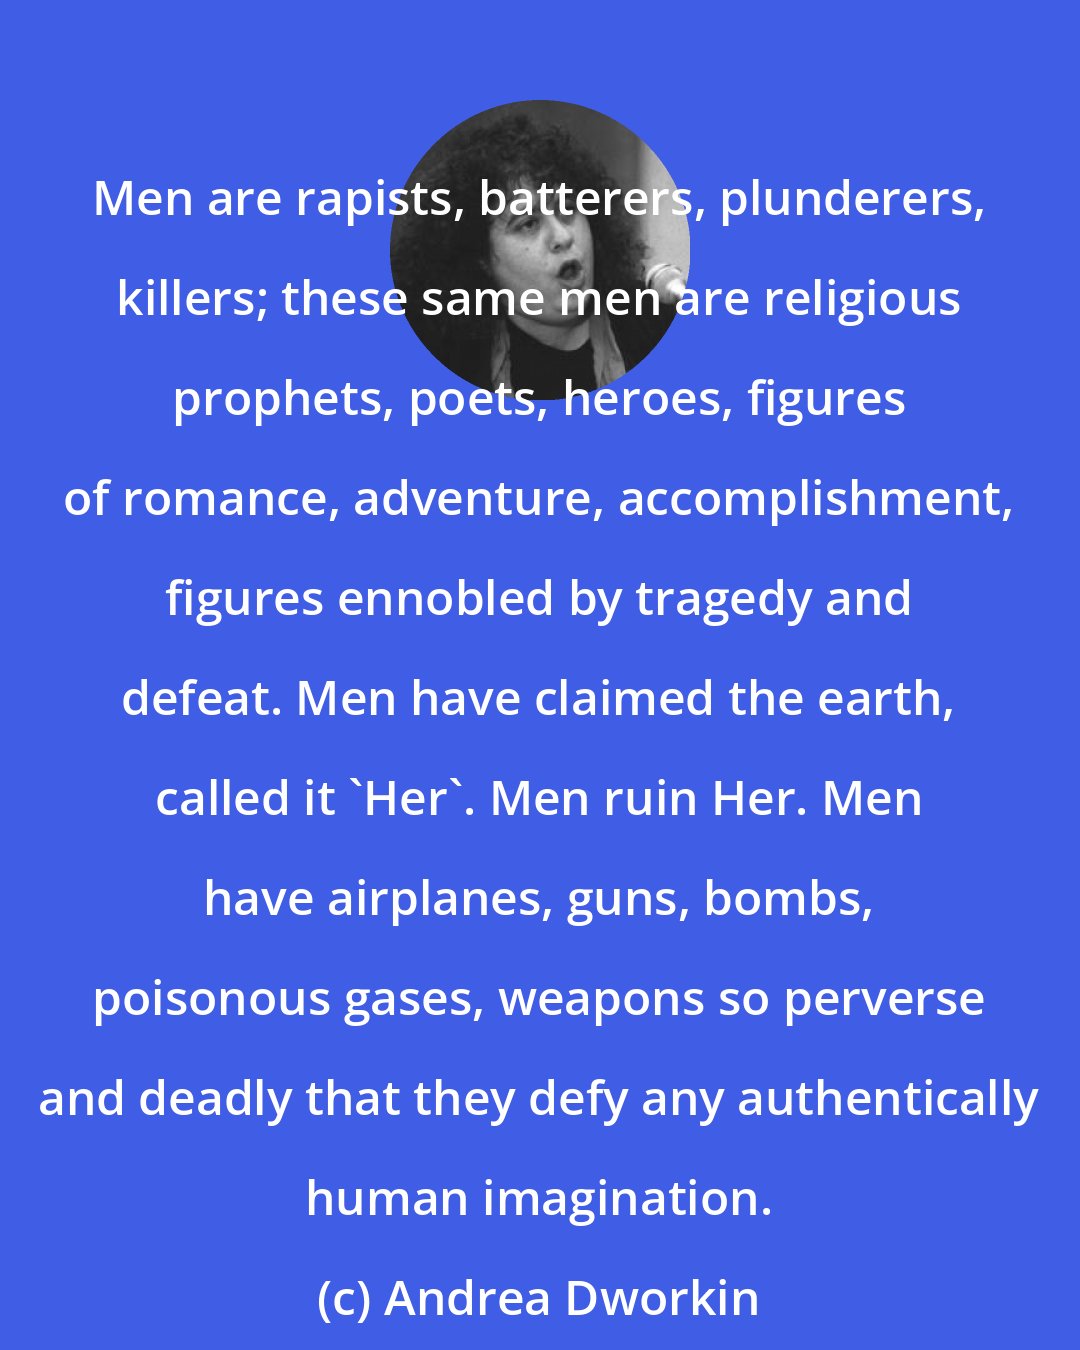 Andrea Dworkin: Men are rapists, batterers, plunderers, killers; these same men are religious prophets, poets, heroes, figures of romance, adventure, accomplishment, figures ennobled by tragedy and defeat. Men have claimed the earth, called it 'Her'. Men ruin Her. Men have airplanes, guns, bombs, poisonous gases, weapons so perverse and deadly that they defy any authentically human imagination.